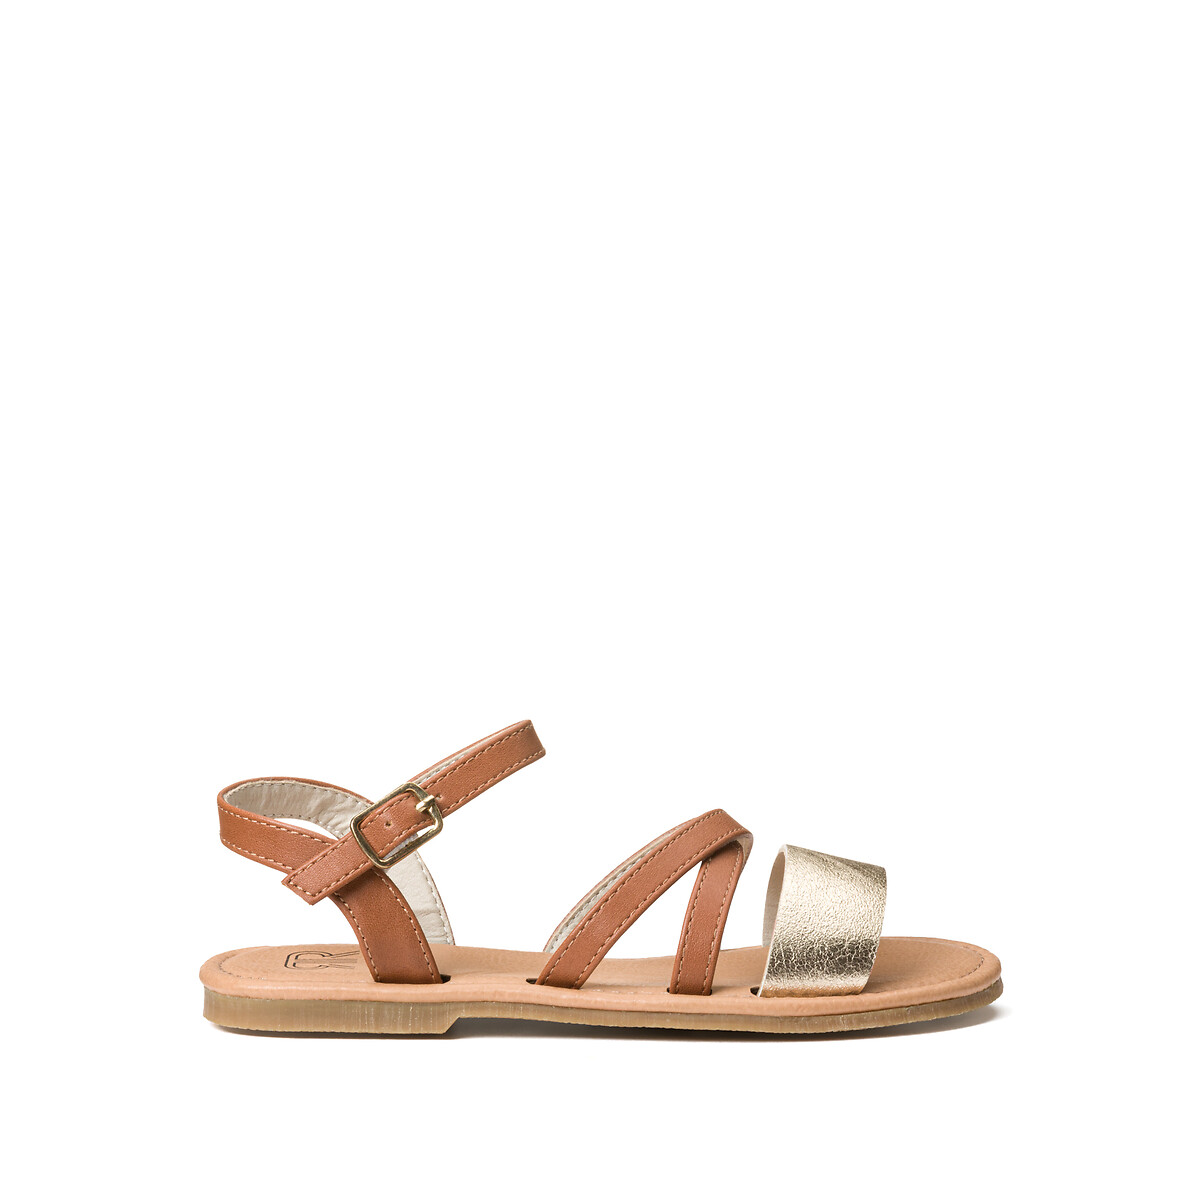 Kids Two-Tone Strappy Sandals